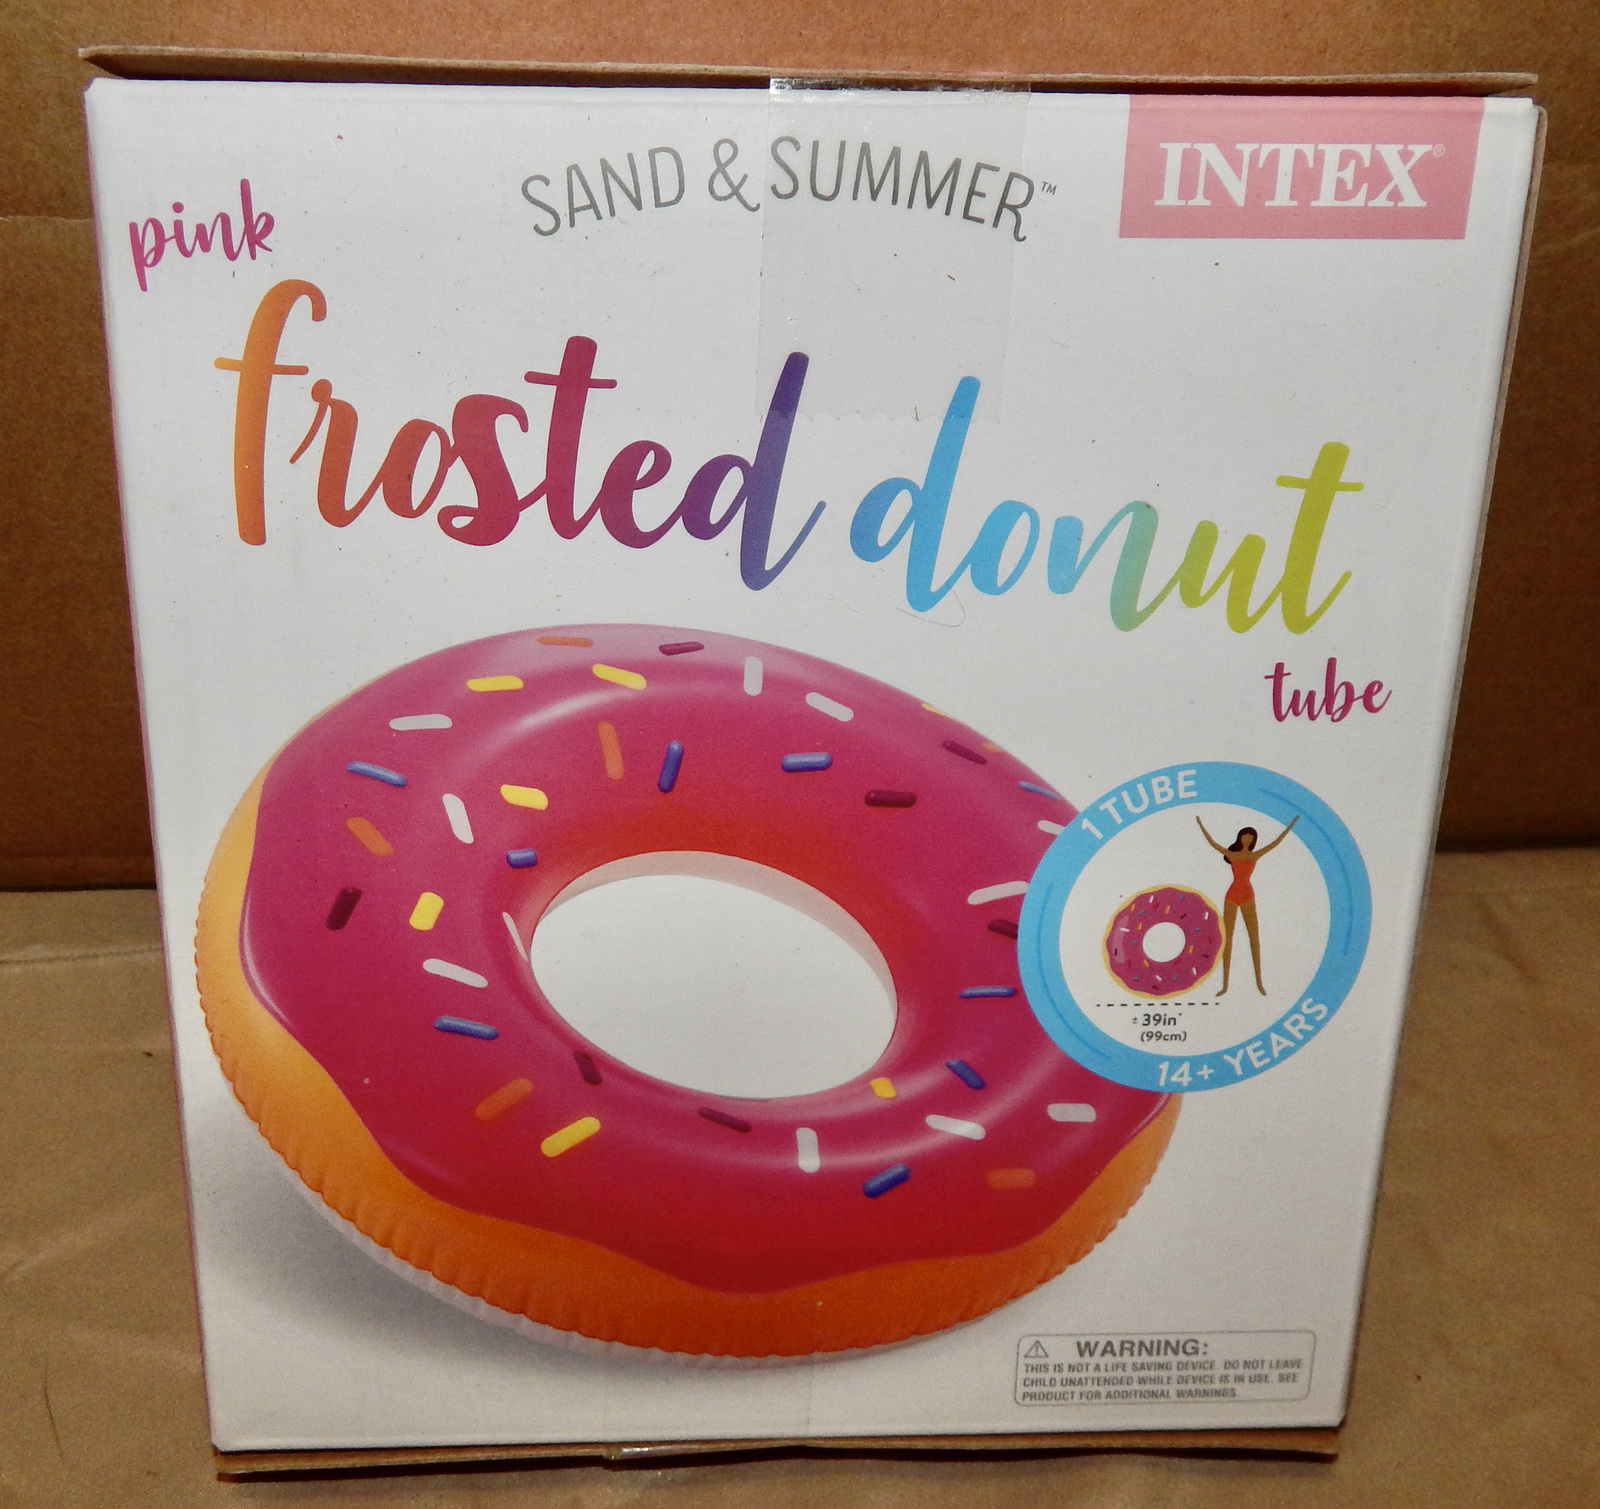 Primary image for Intex Sand & Summer Pink Frosted Sprinkle Donut Pool Tube Float 39" x 10" 225G